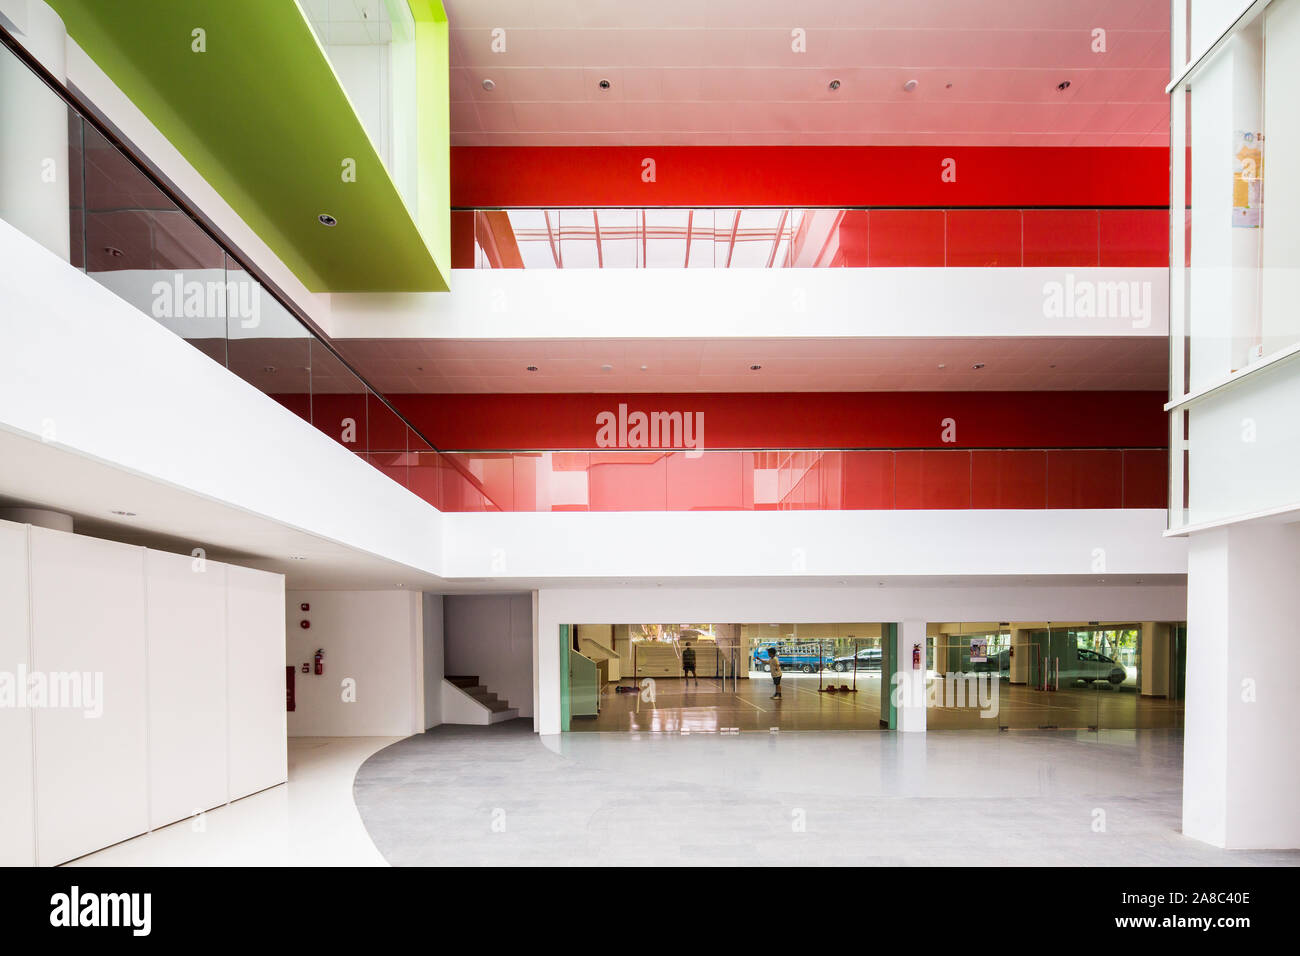 Community centre interior design with strong colour contrast to make it pop out. Stock Photo